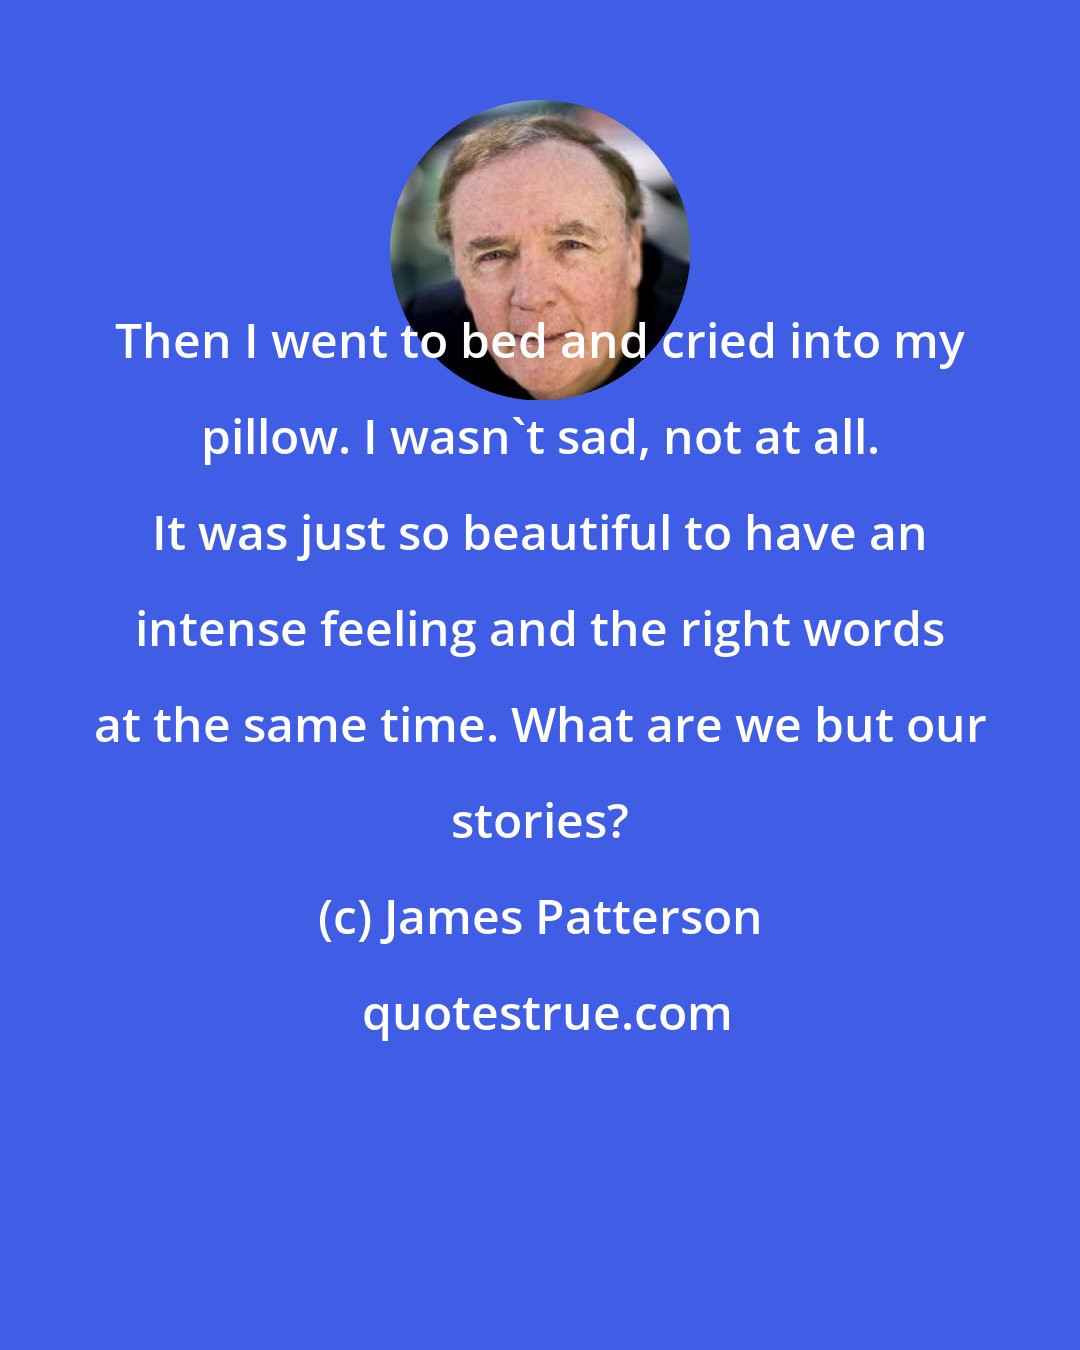 James Patterson: Then I went to bed and cried into my pillow. I wasn't sad, not at all. It was just so beautiful to have an intense feeling and the right words at the same time. What are we but our stories?